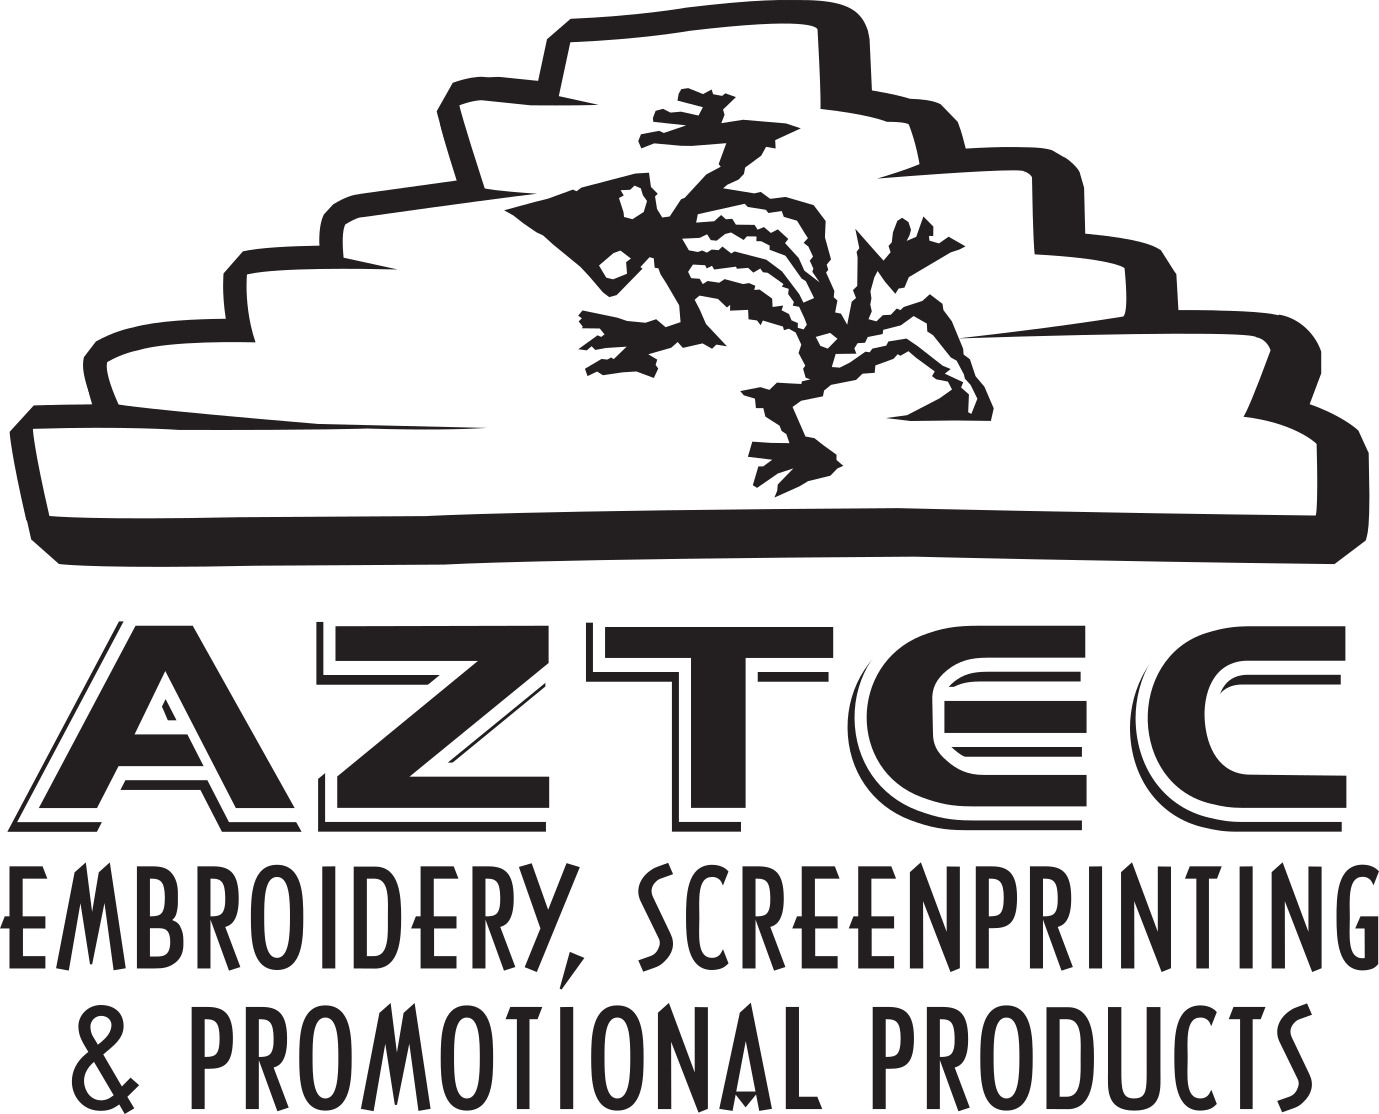 Aztec logo with text 'Embroidery, Screenprinting and Promotional Products